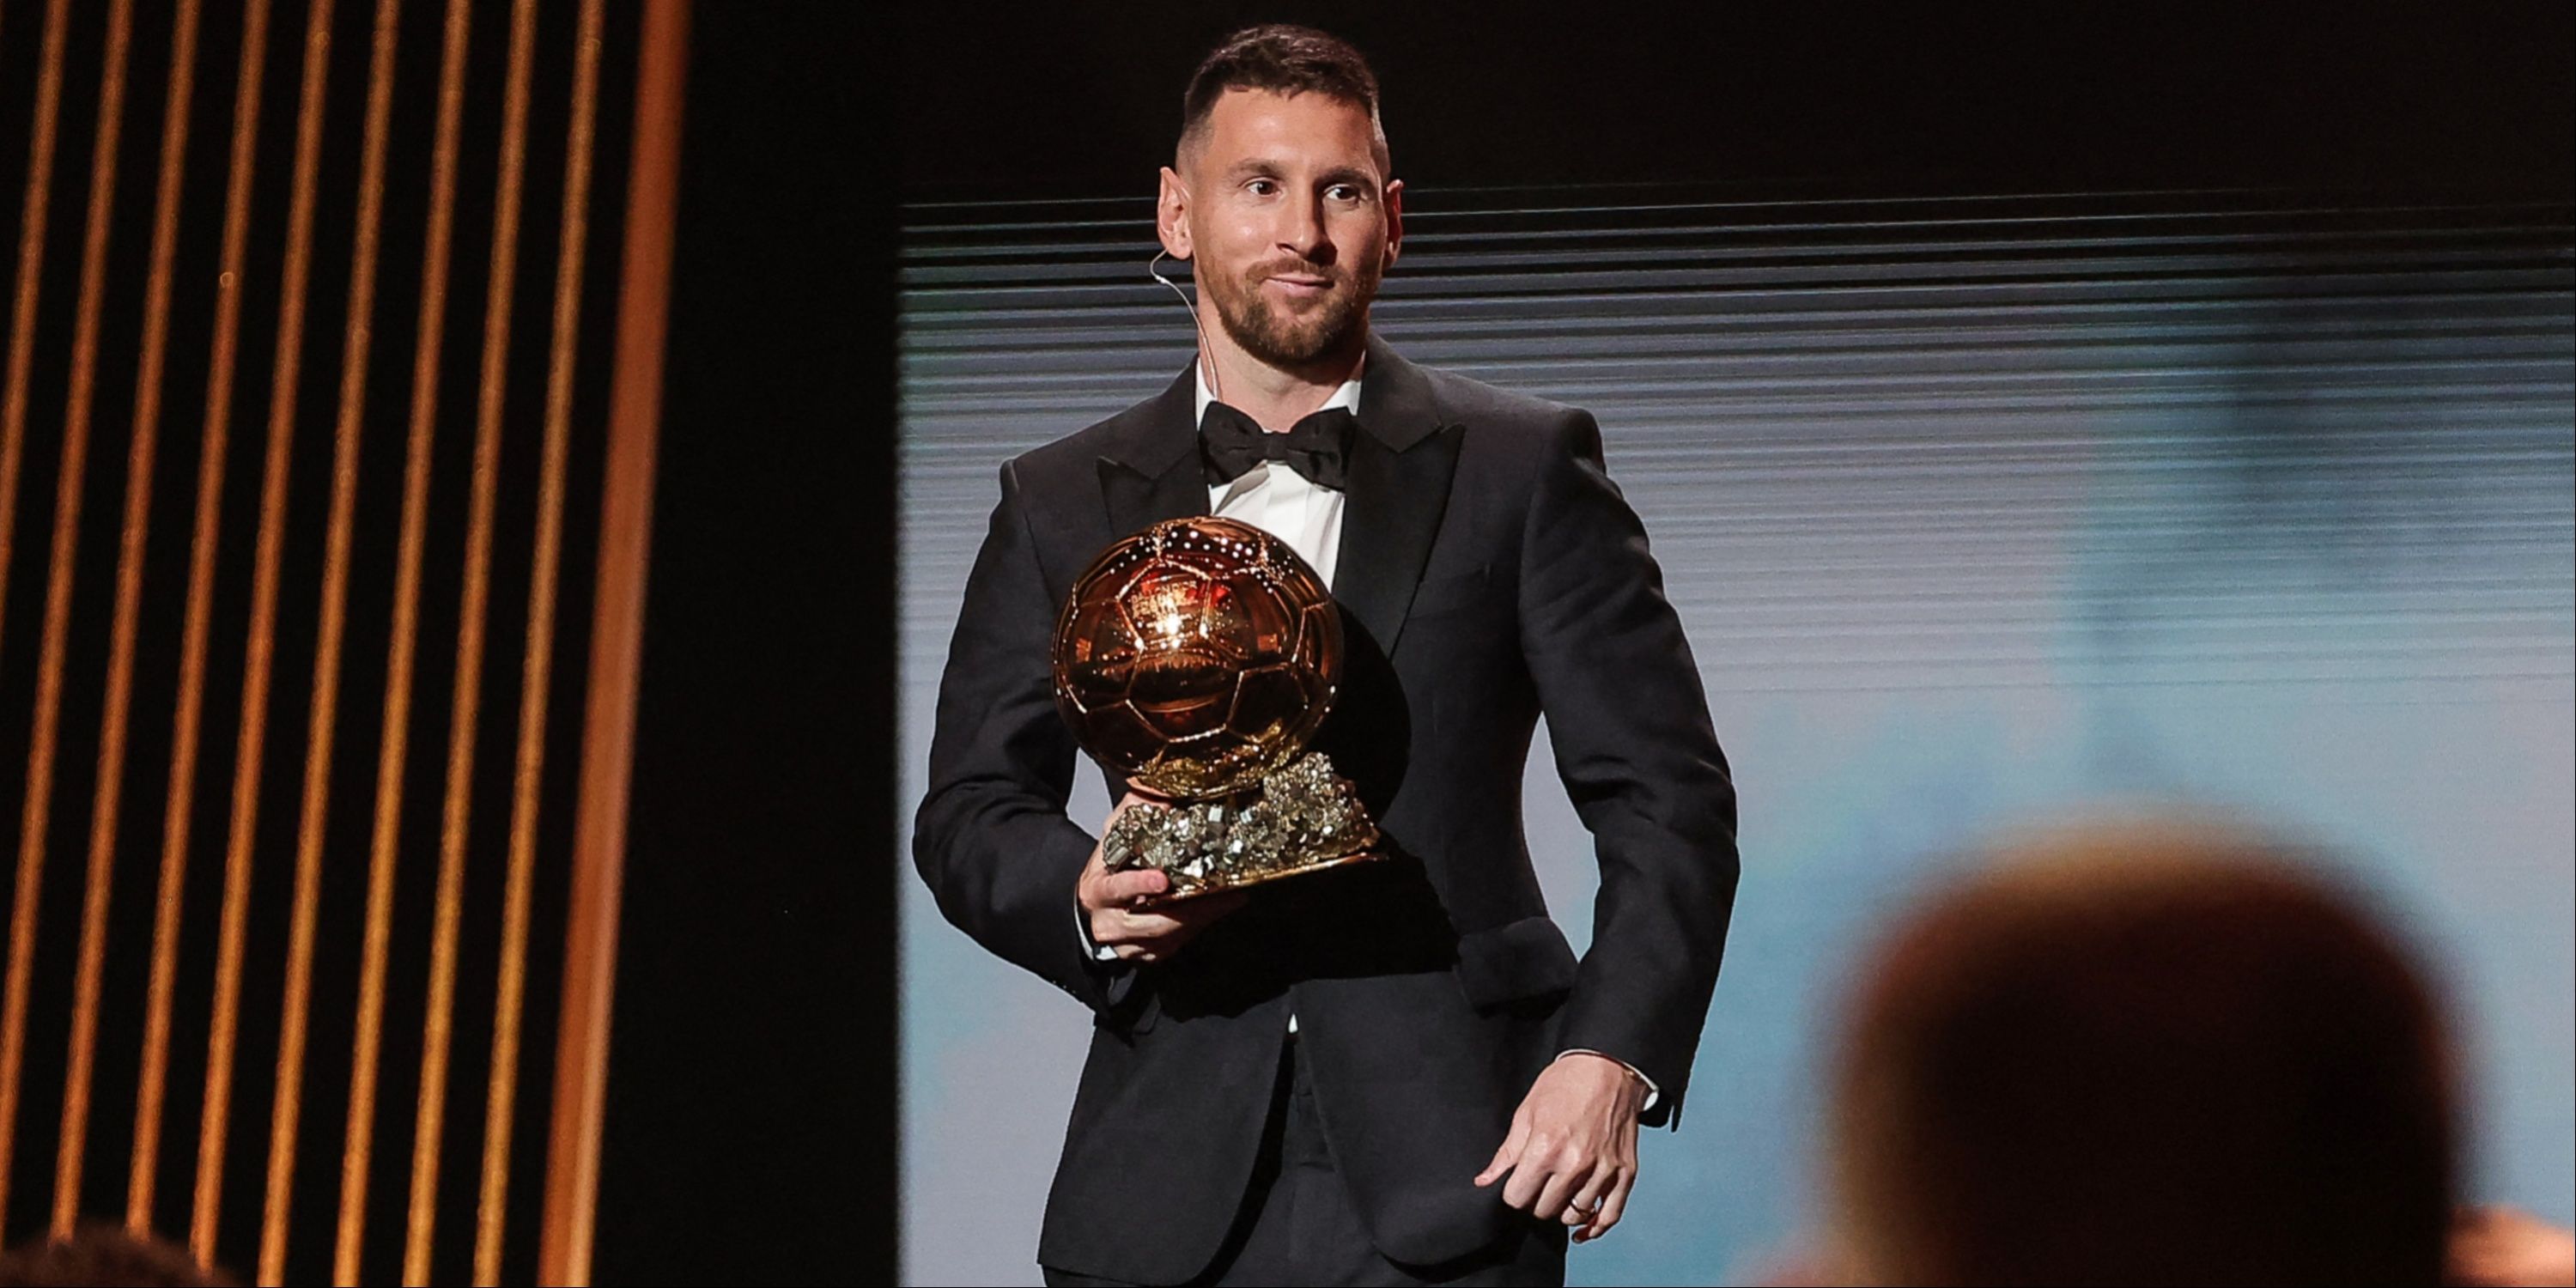 Inter Miami CF's Argentine forward Lionel Messi holds his trophy on stage as he receives his 8th Ballon d'Or award